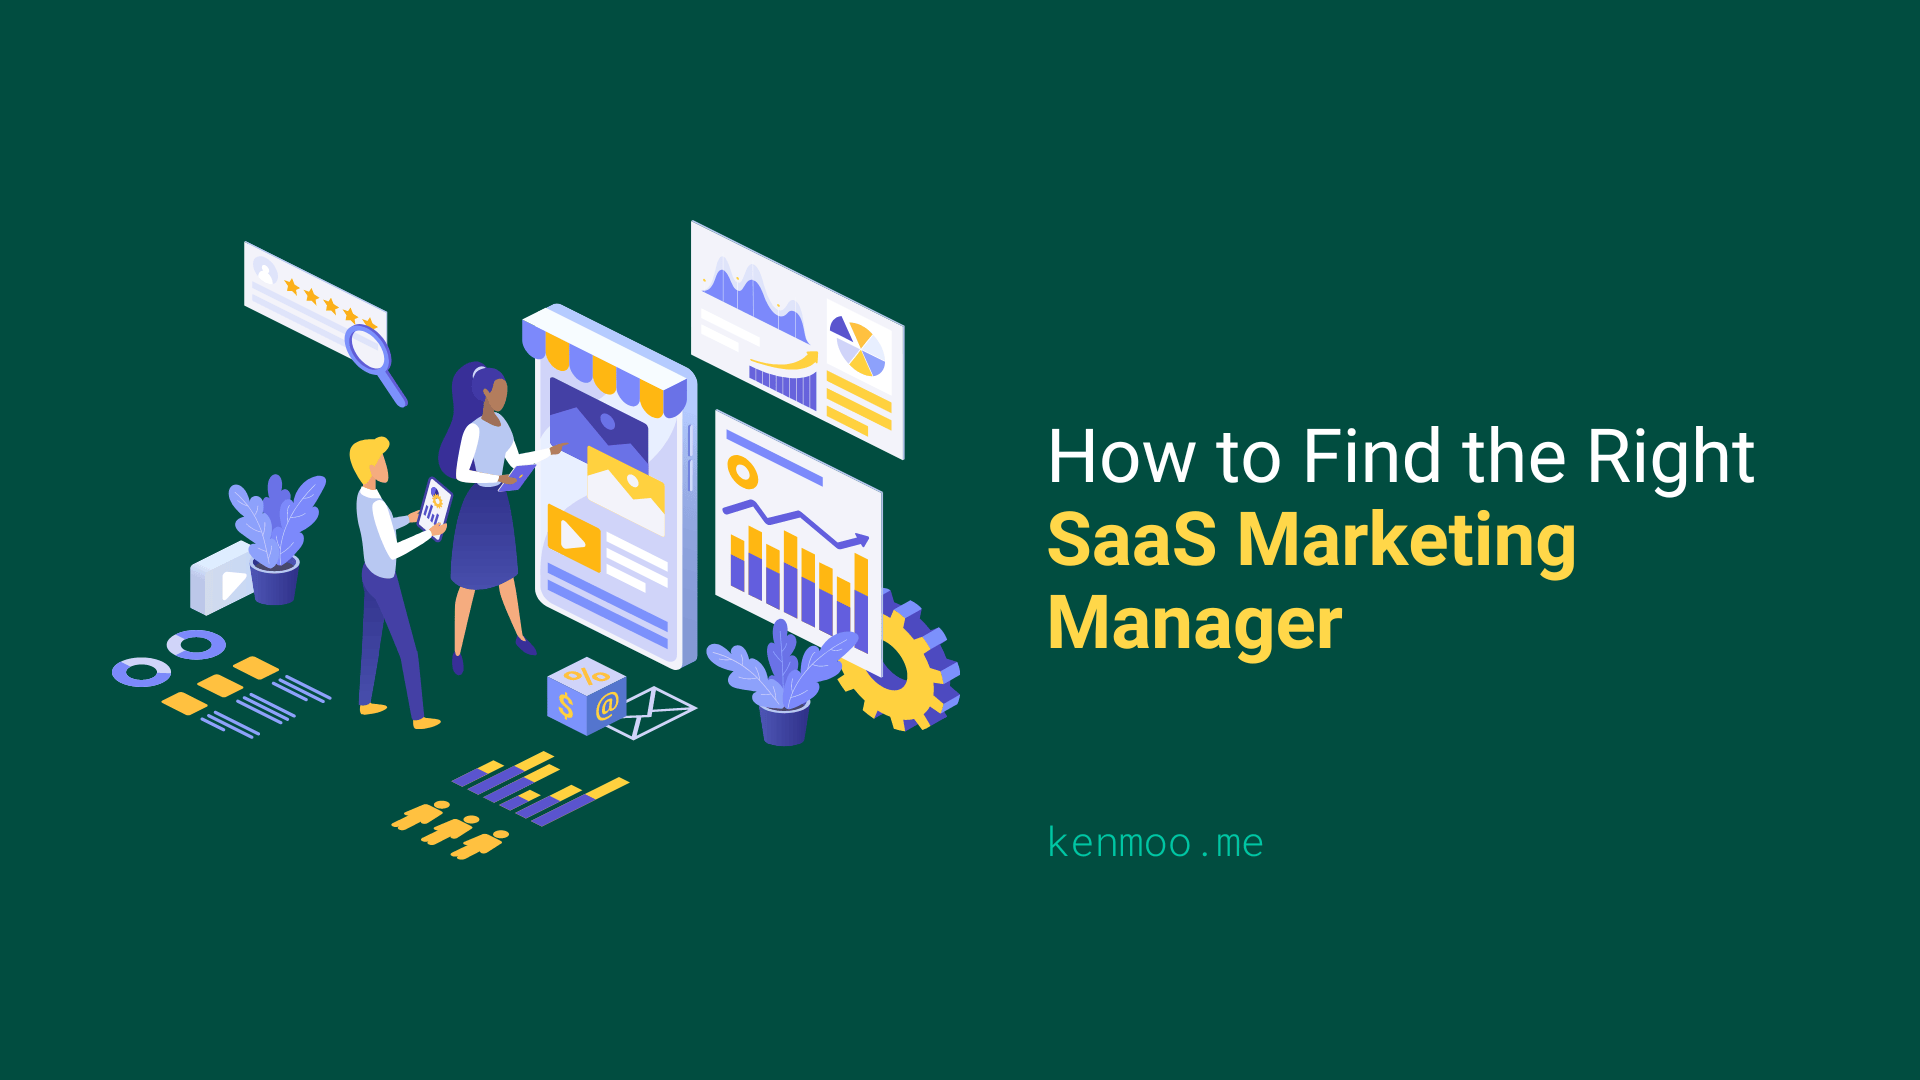 How to Find the Right SaaS Marketing Manager